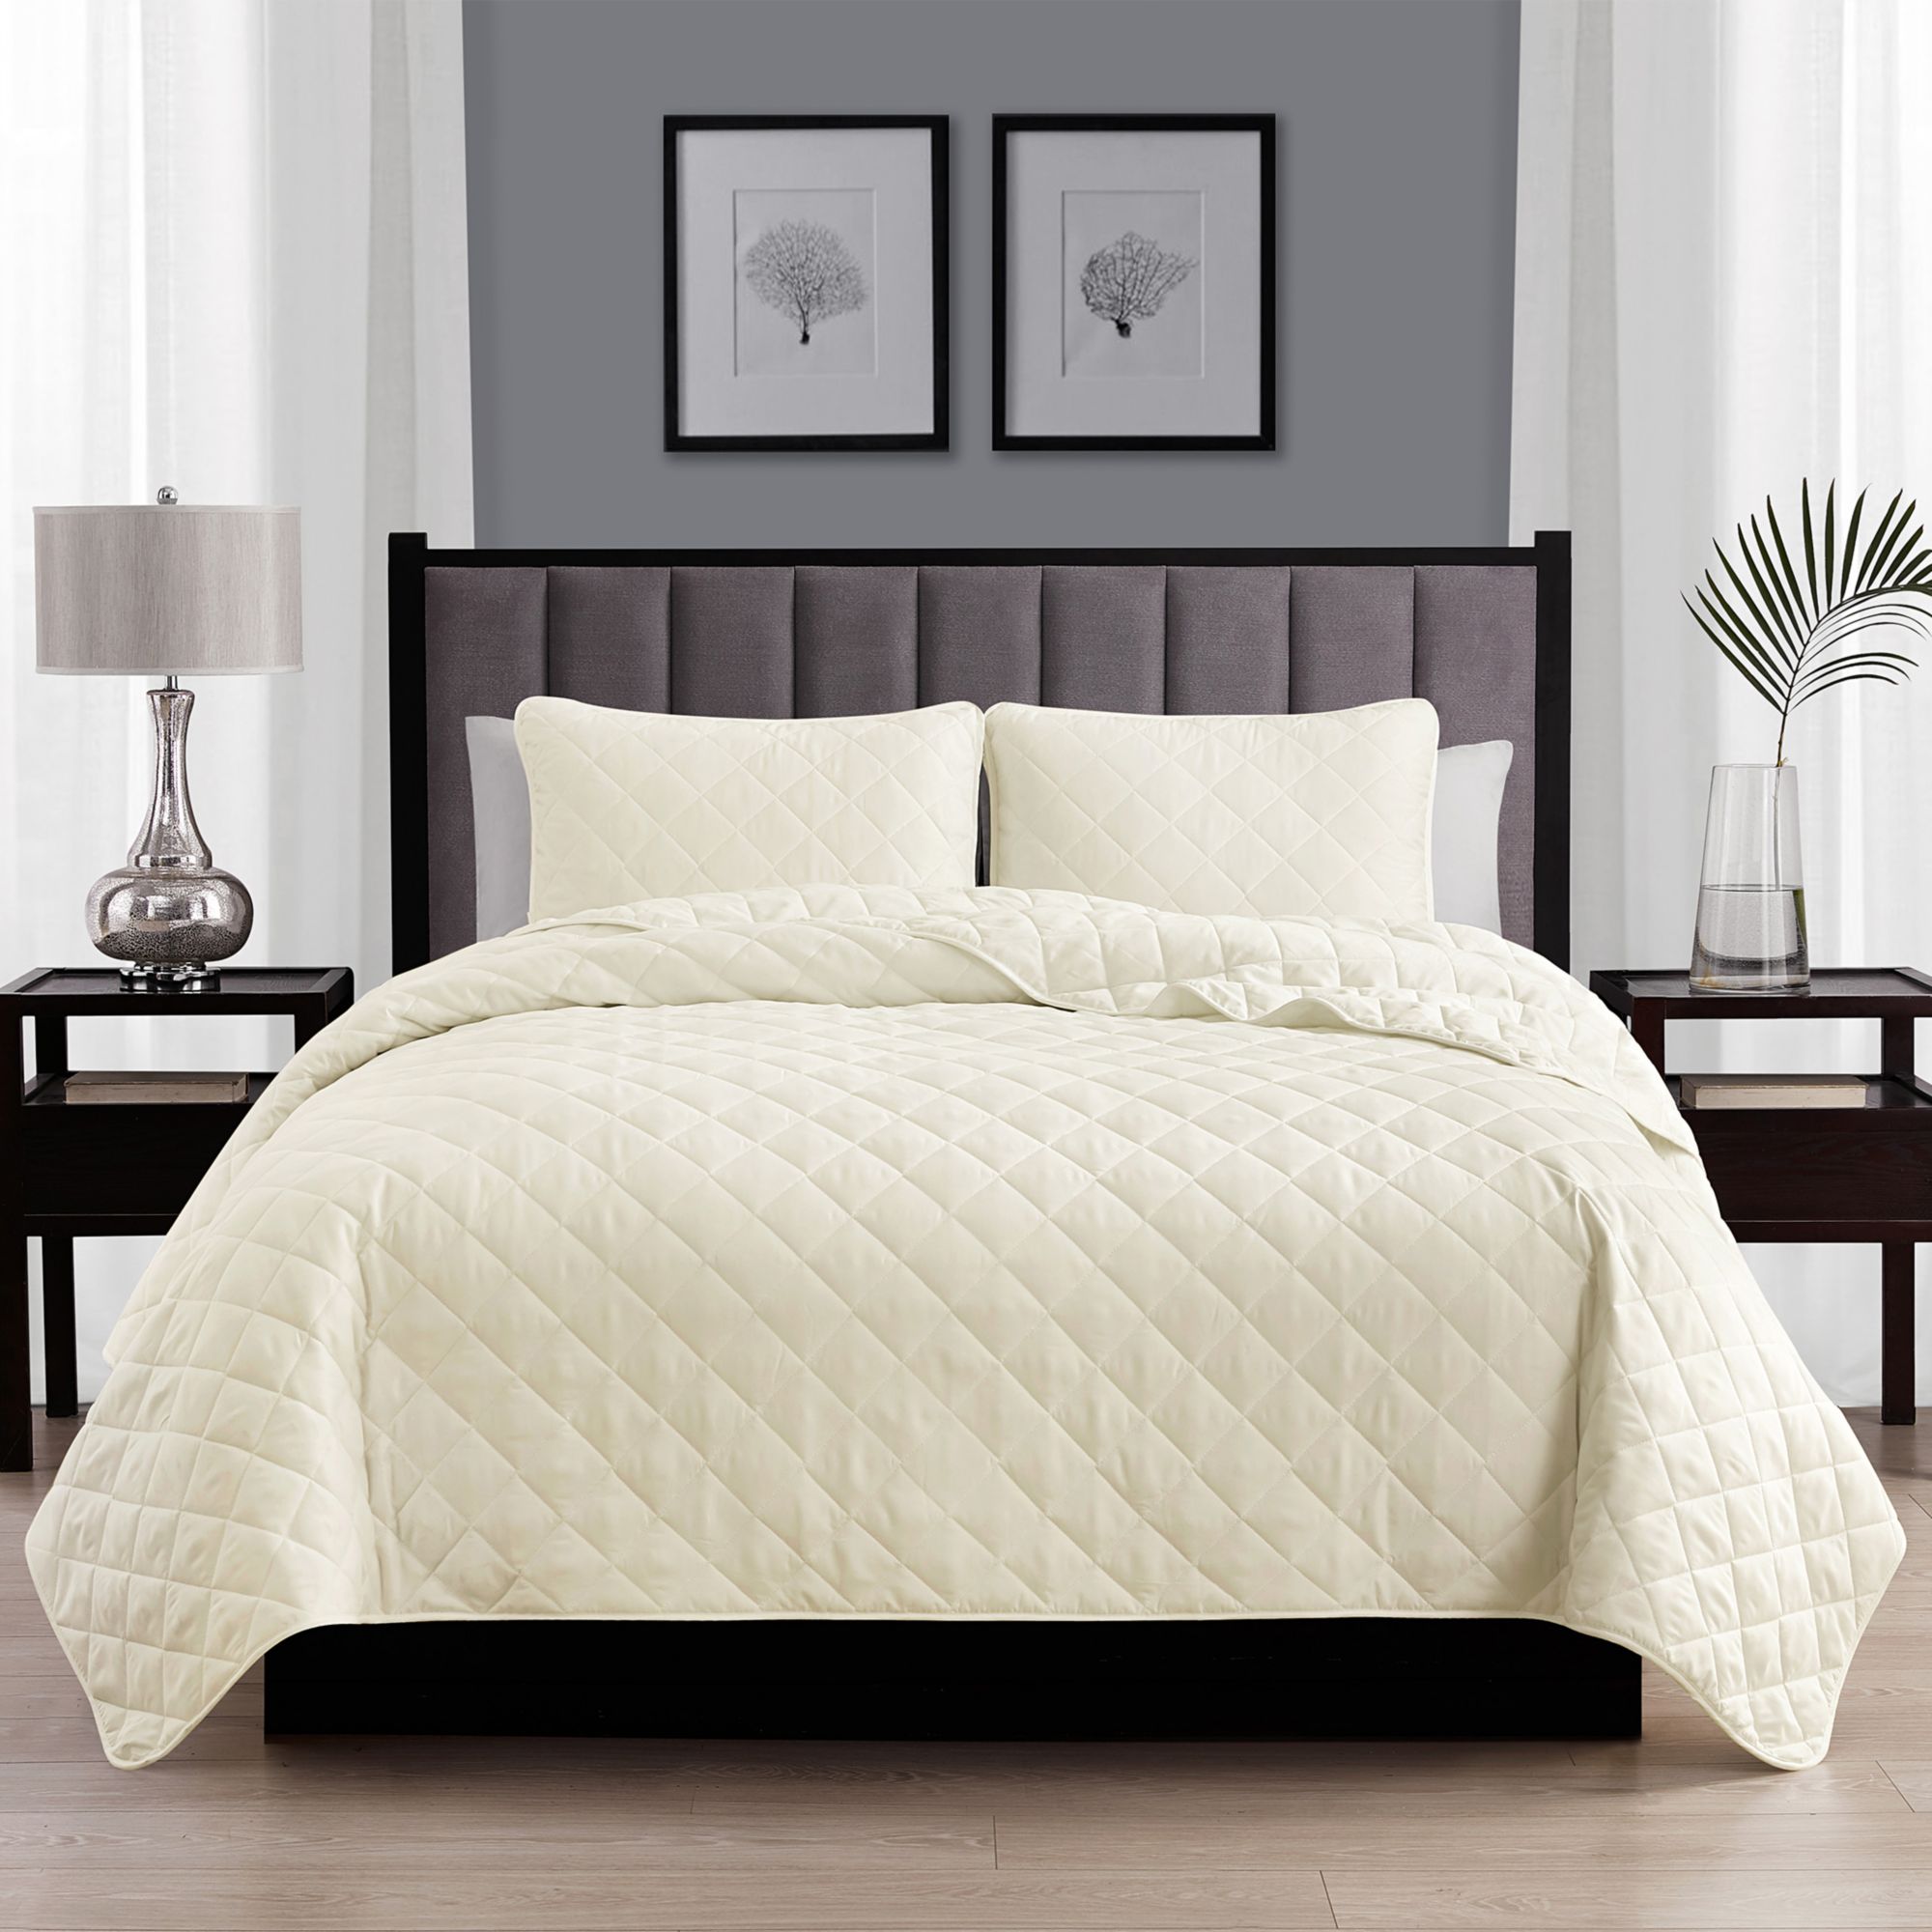 Swift Home Diamond Stitch Quilt Ivory Bedspread Coverlet Set - Full/Queen